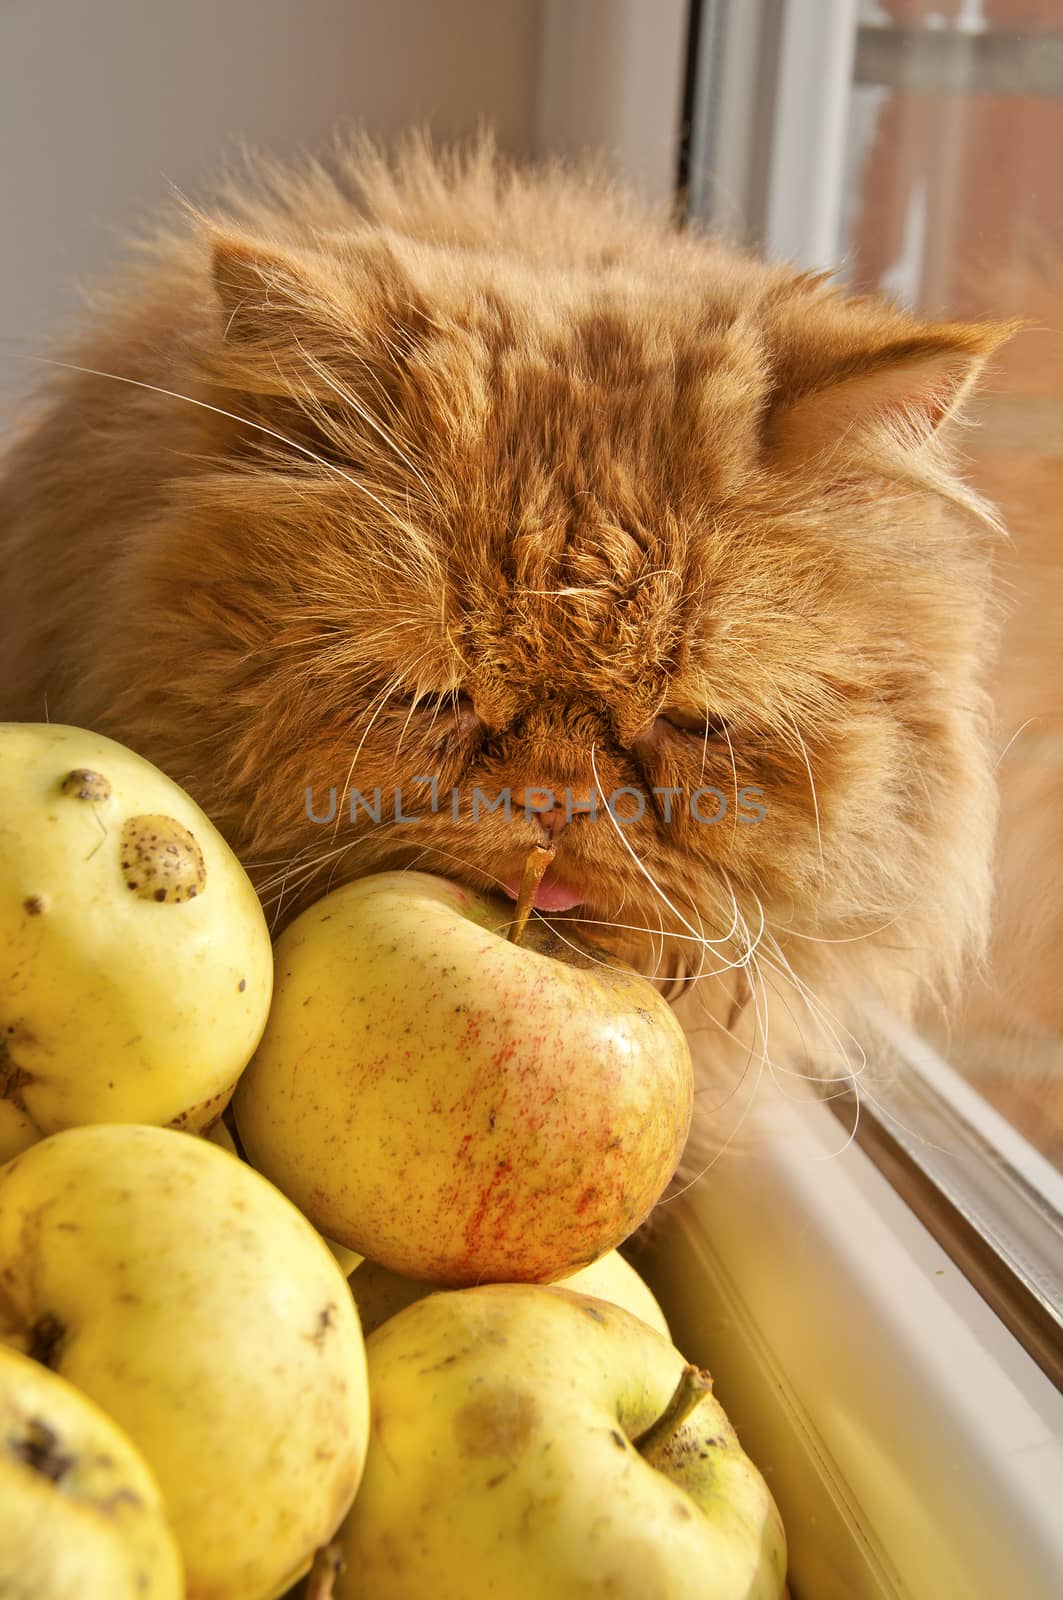 Red cat with apples looks out window by infinityyy